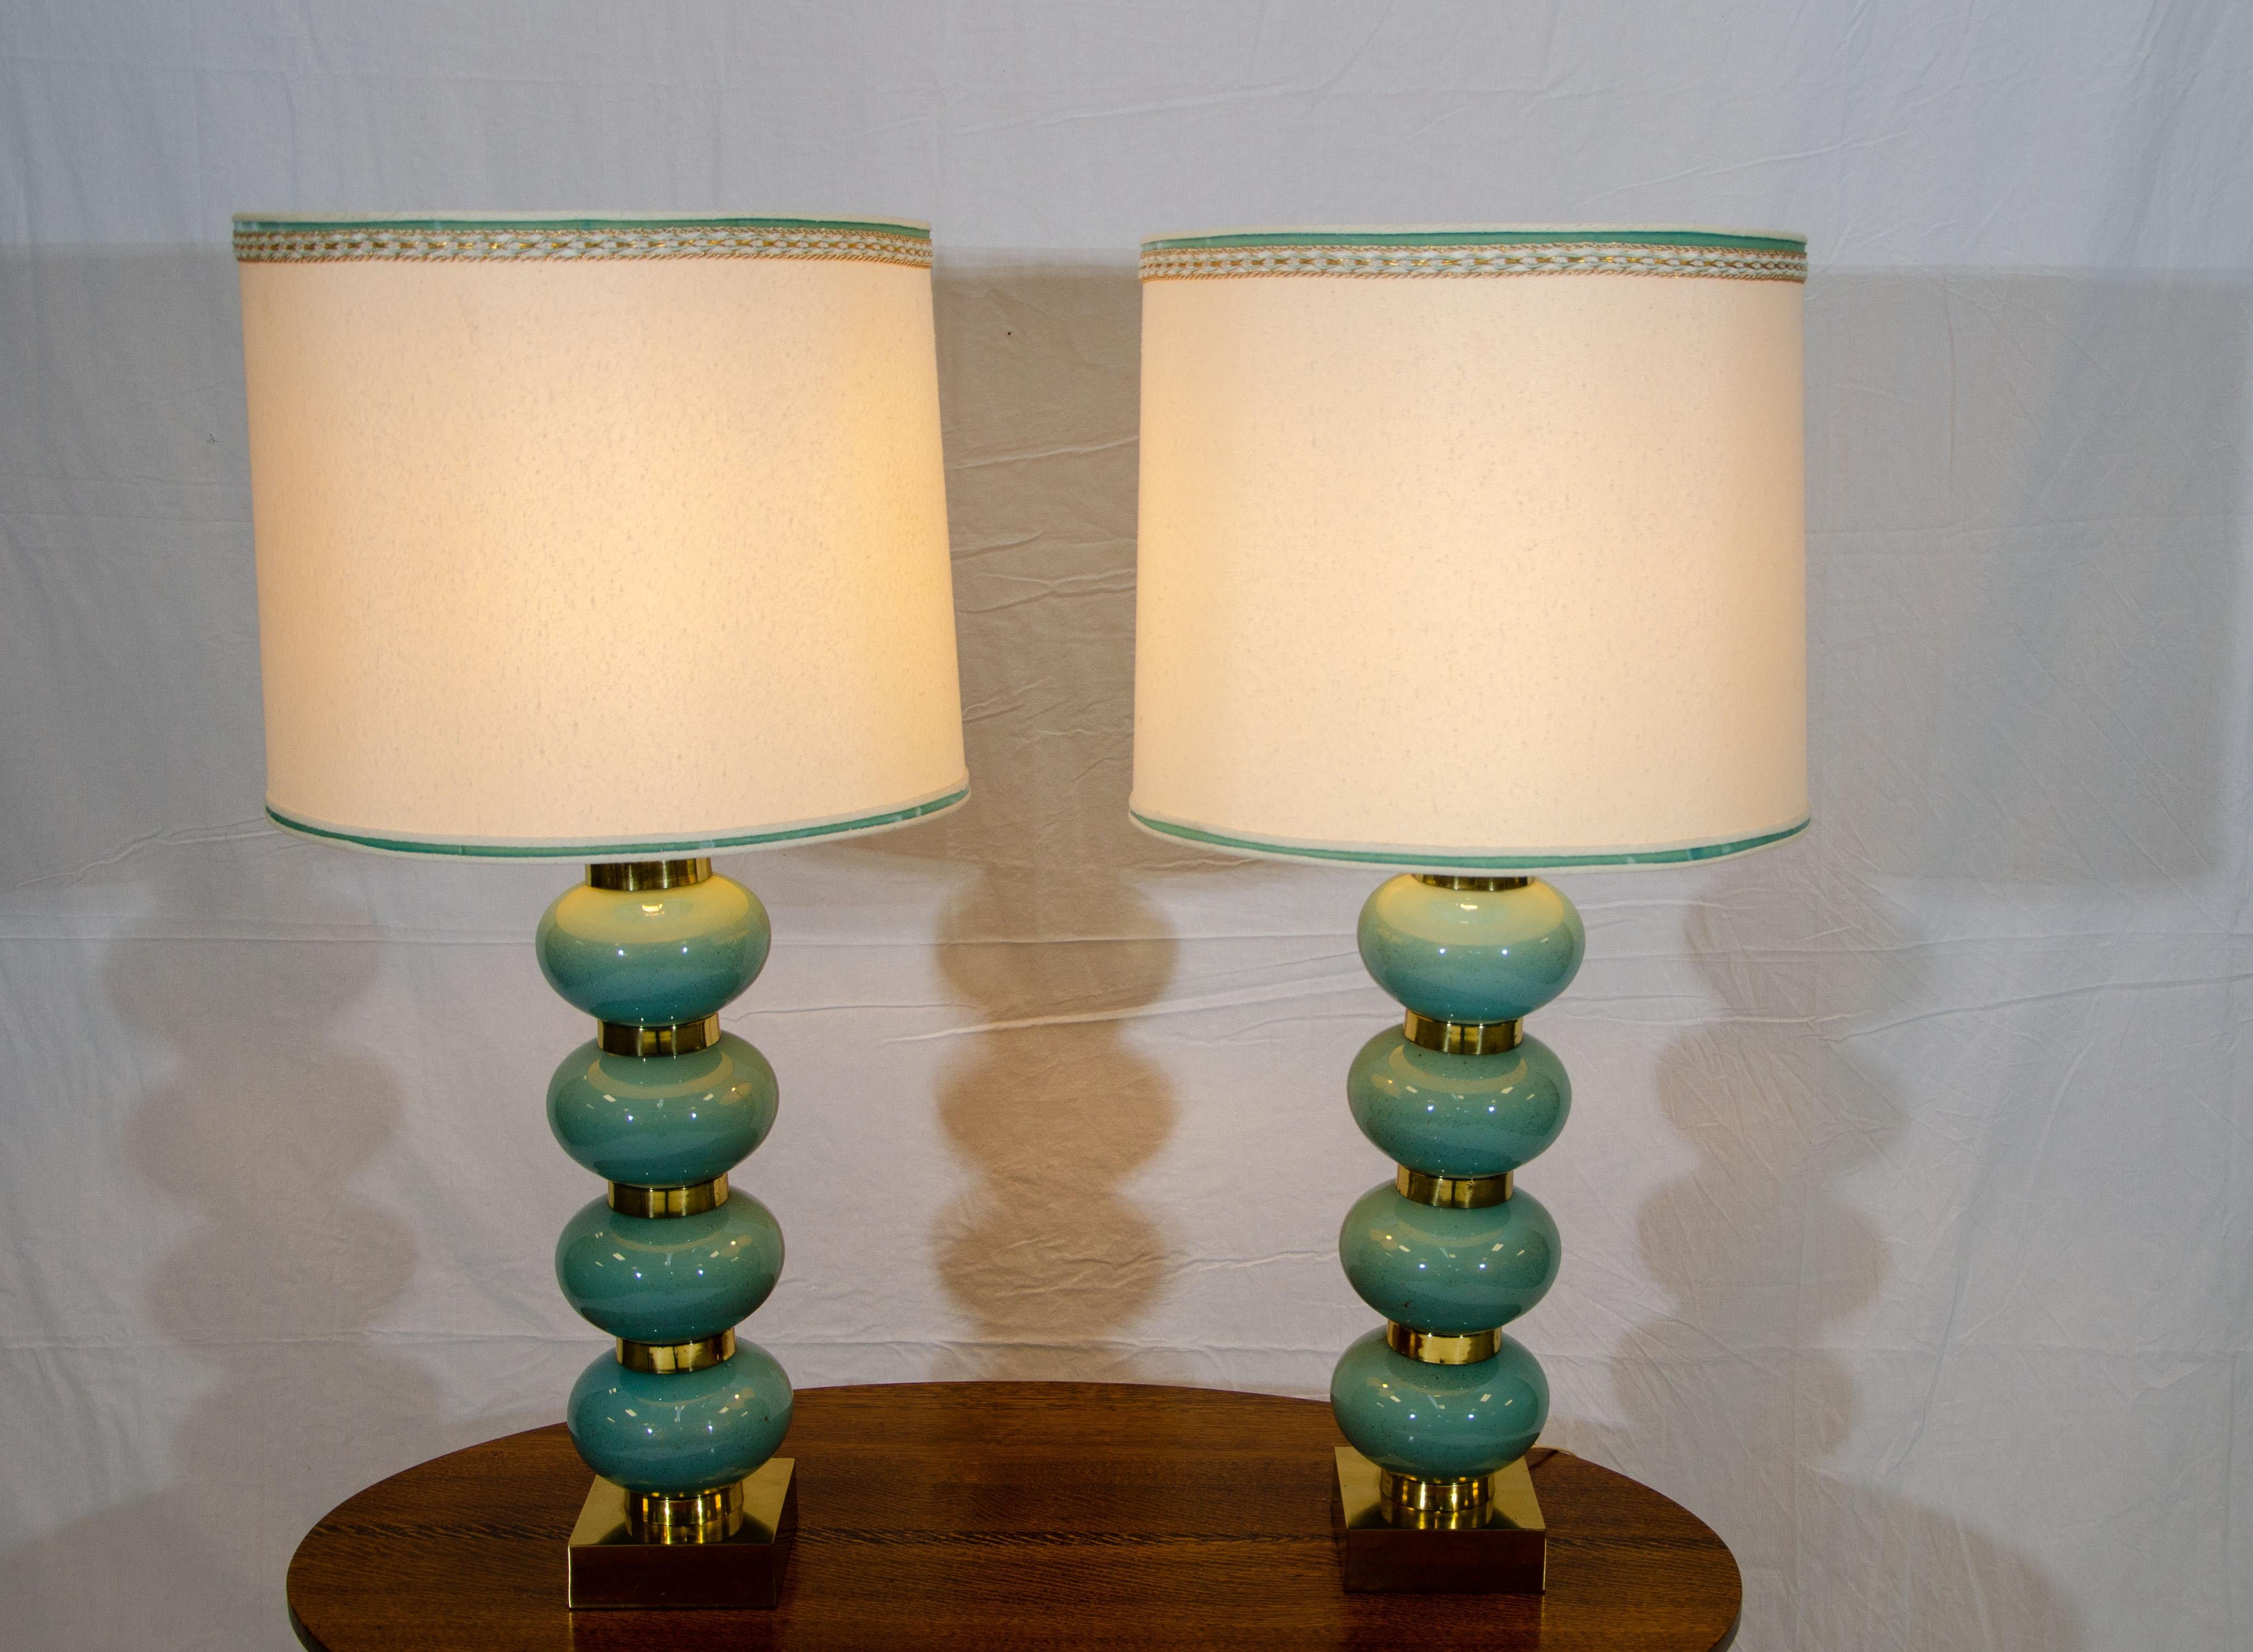 Pair of Blue Table Lamps, Original Shades In Good Condition For Sale In Crockett, CA